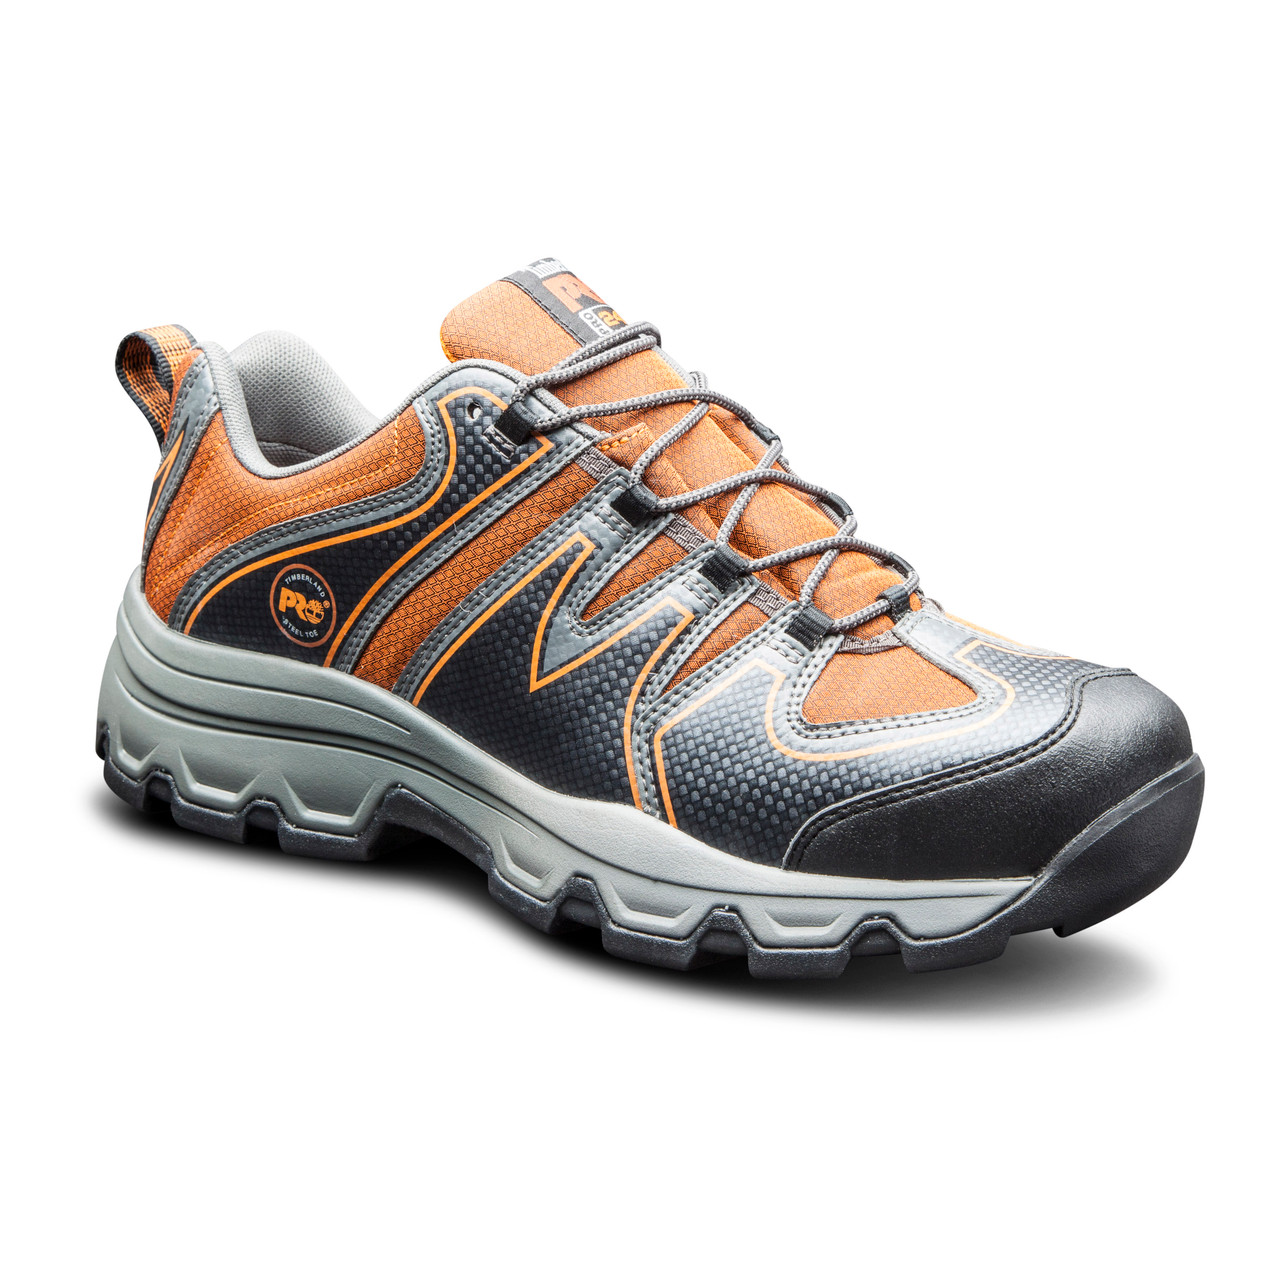 Timberland PRO® Low #A11OU Men's Steel Safety Work